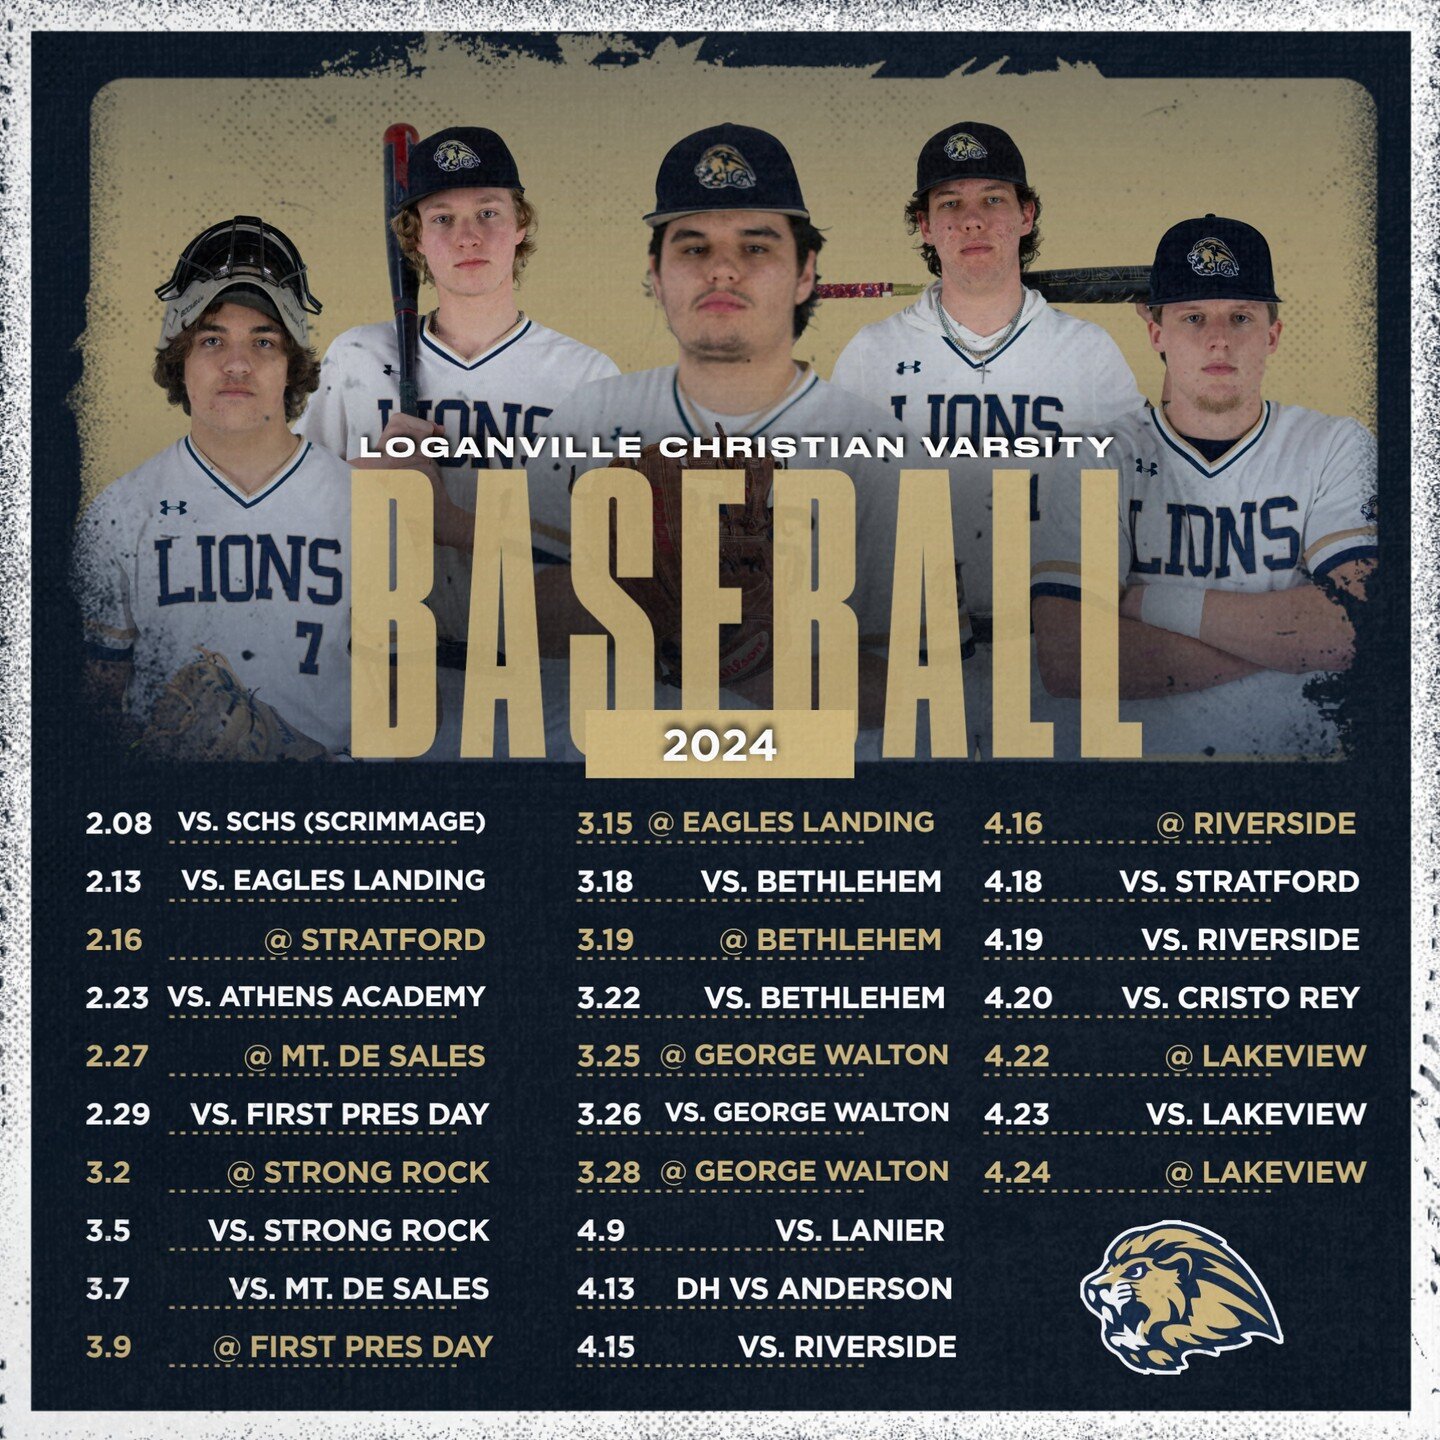 ⚾️LCA Varsity Baseball hits the field this week in a scrimmage against Social Circle on Thursday 2/8. Check out the full season schedule below and come cheer on the Lions!